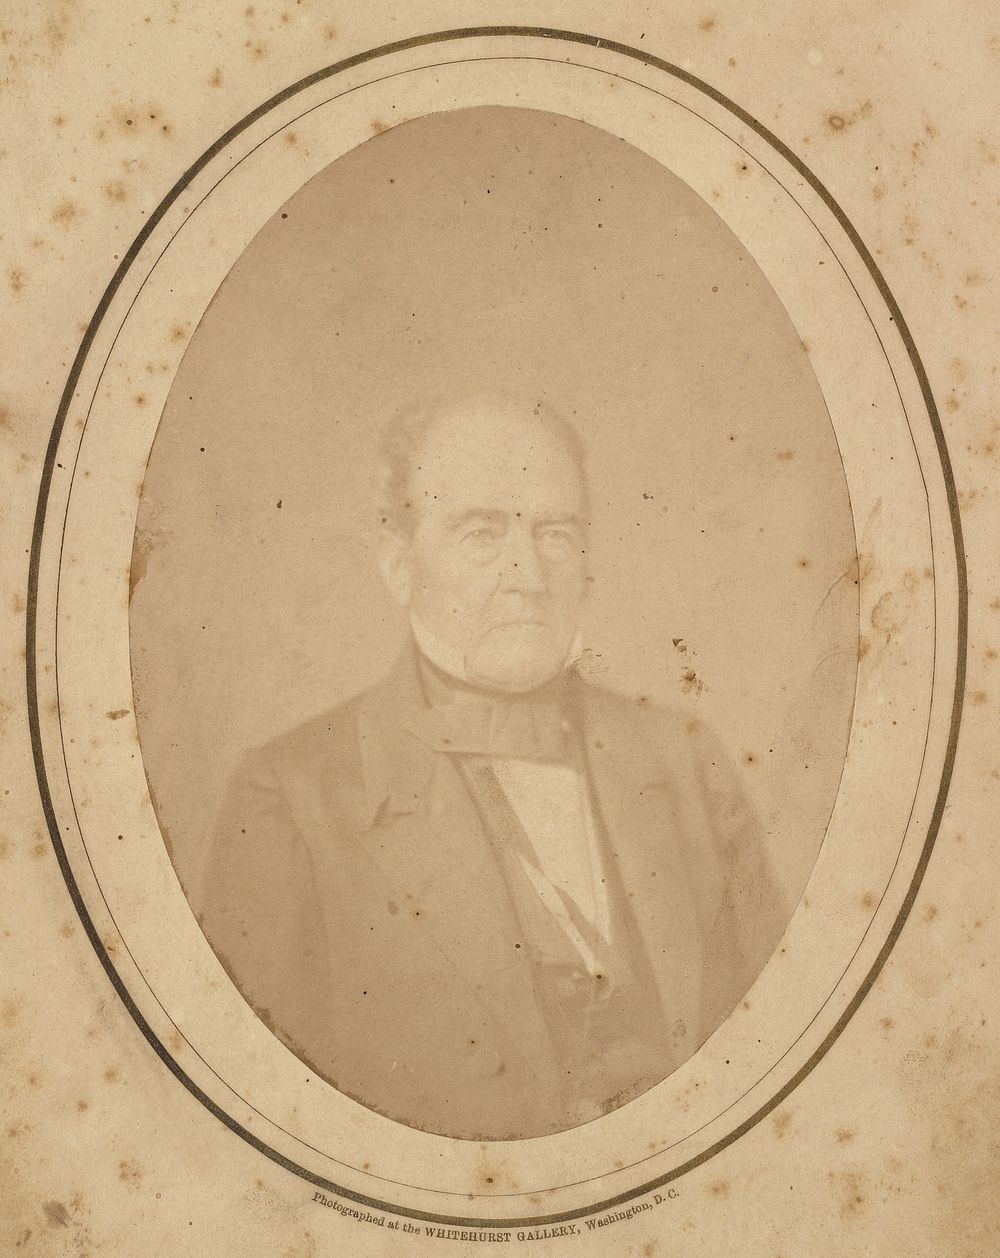 John Bell, Constitutional Union Candidate for U.S. President, 1860 by Whitehurst Gallery